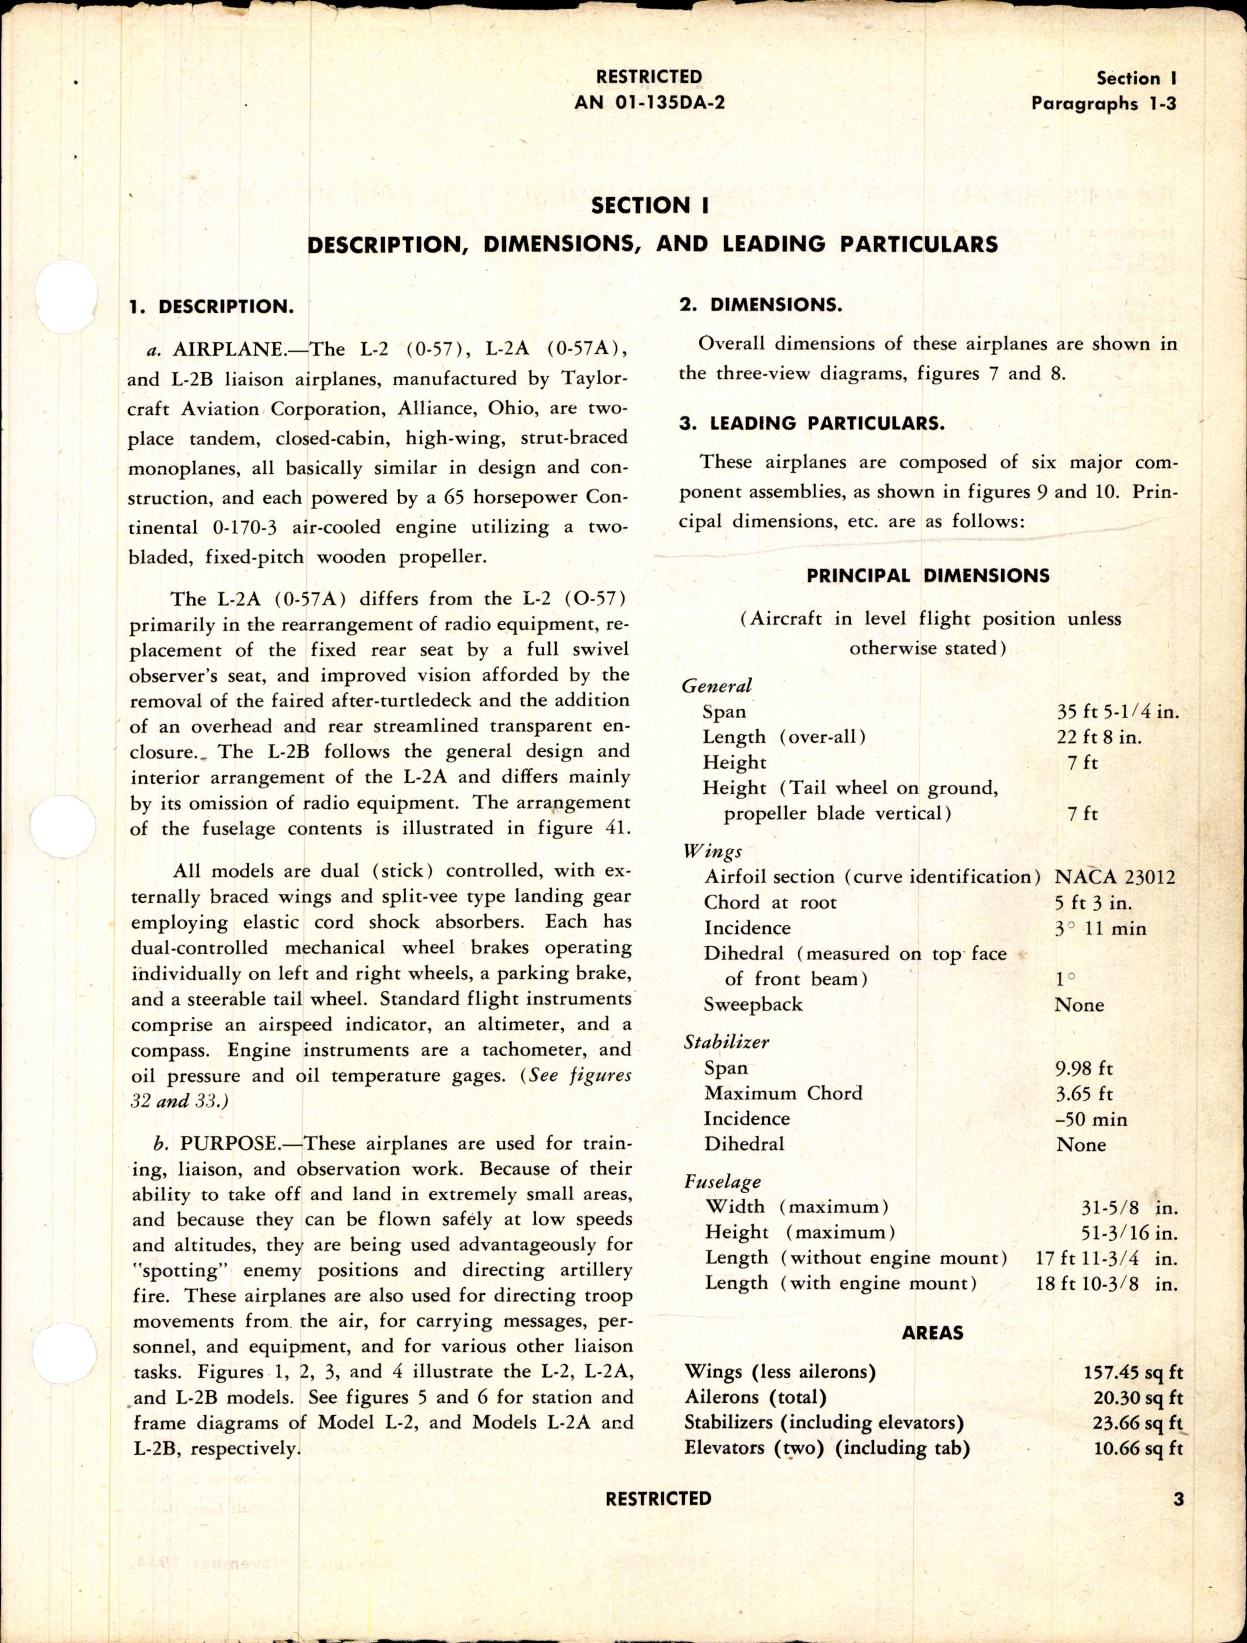 Sample page 7 from AirCorps Library document: Erection and Maintenance Instructions for L-2, L-2A, and L-2B Airplanes